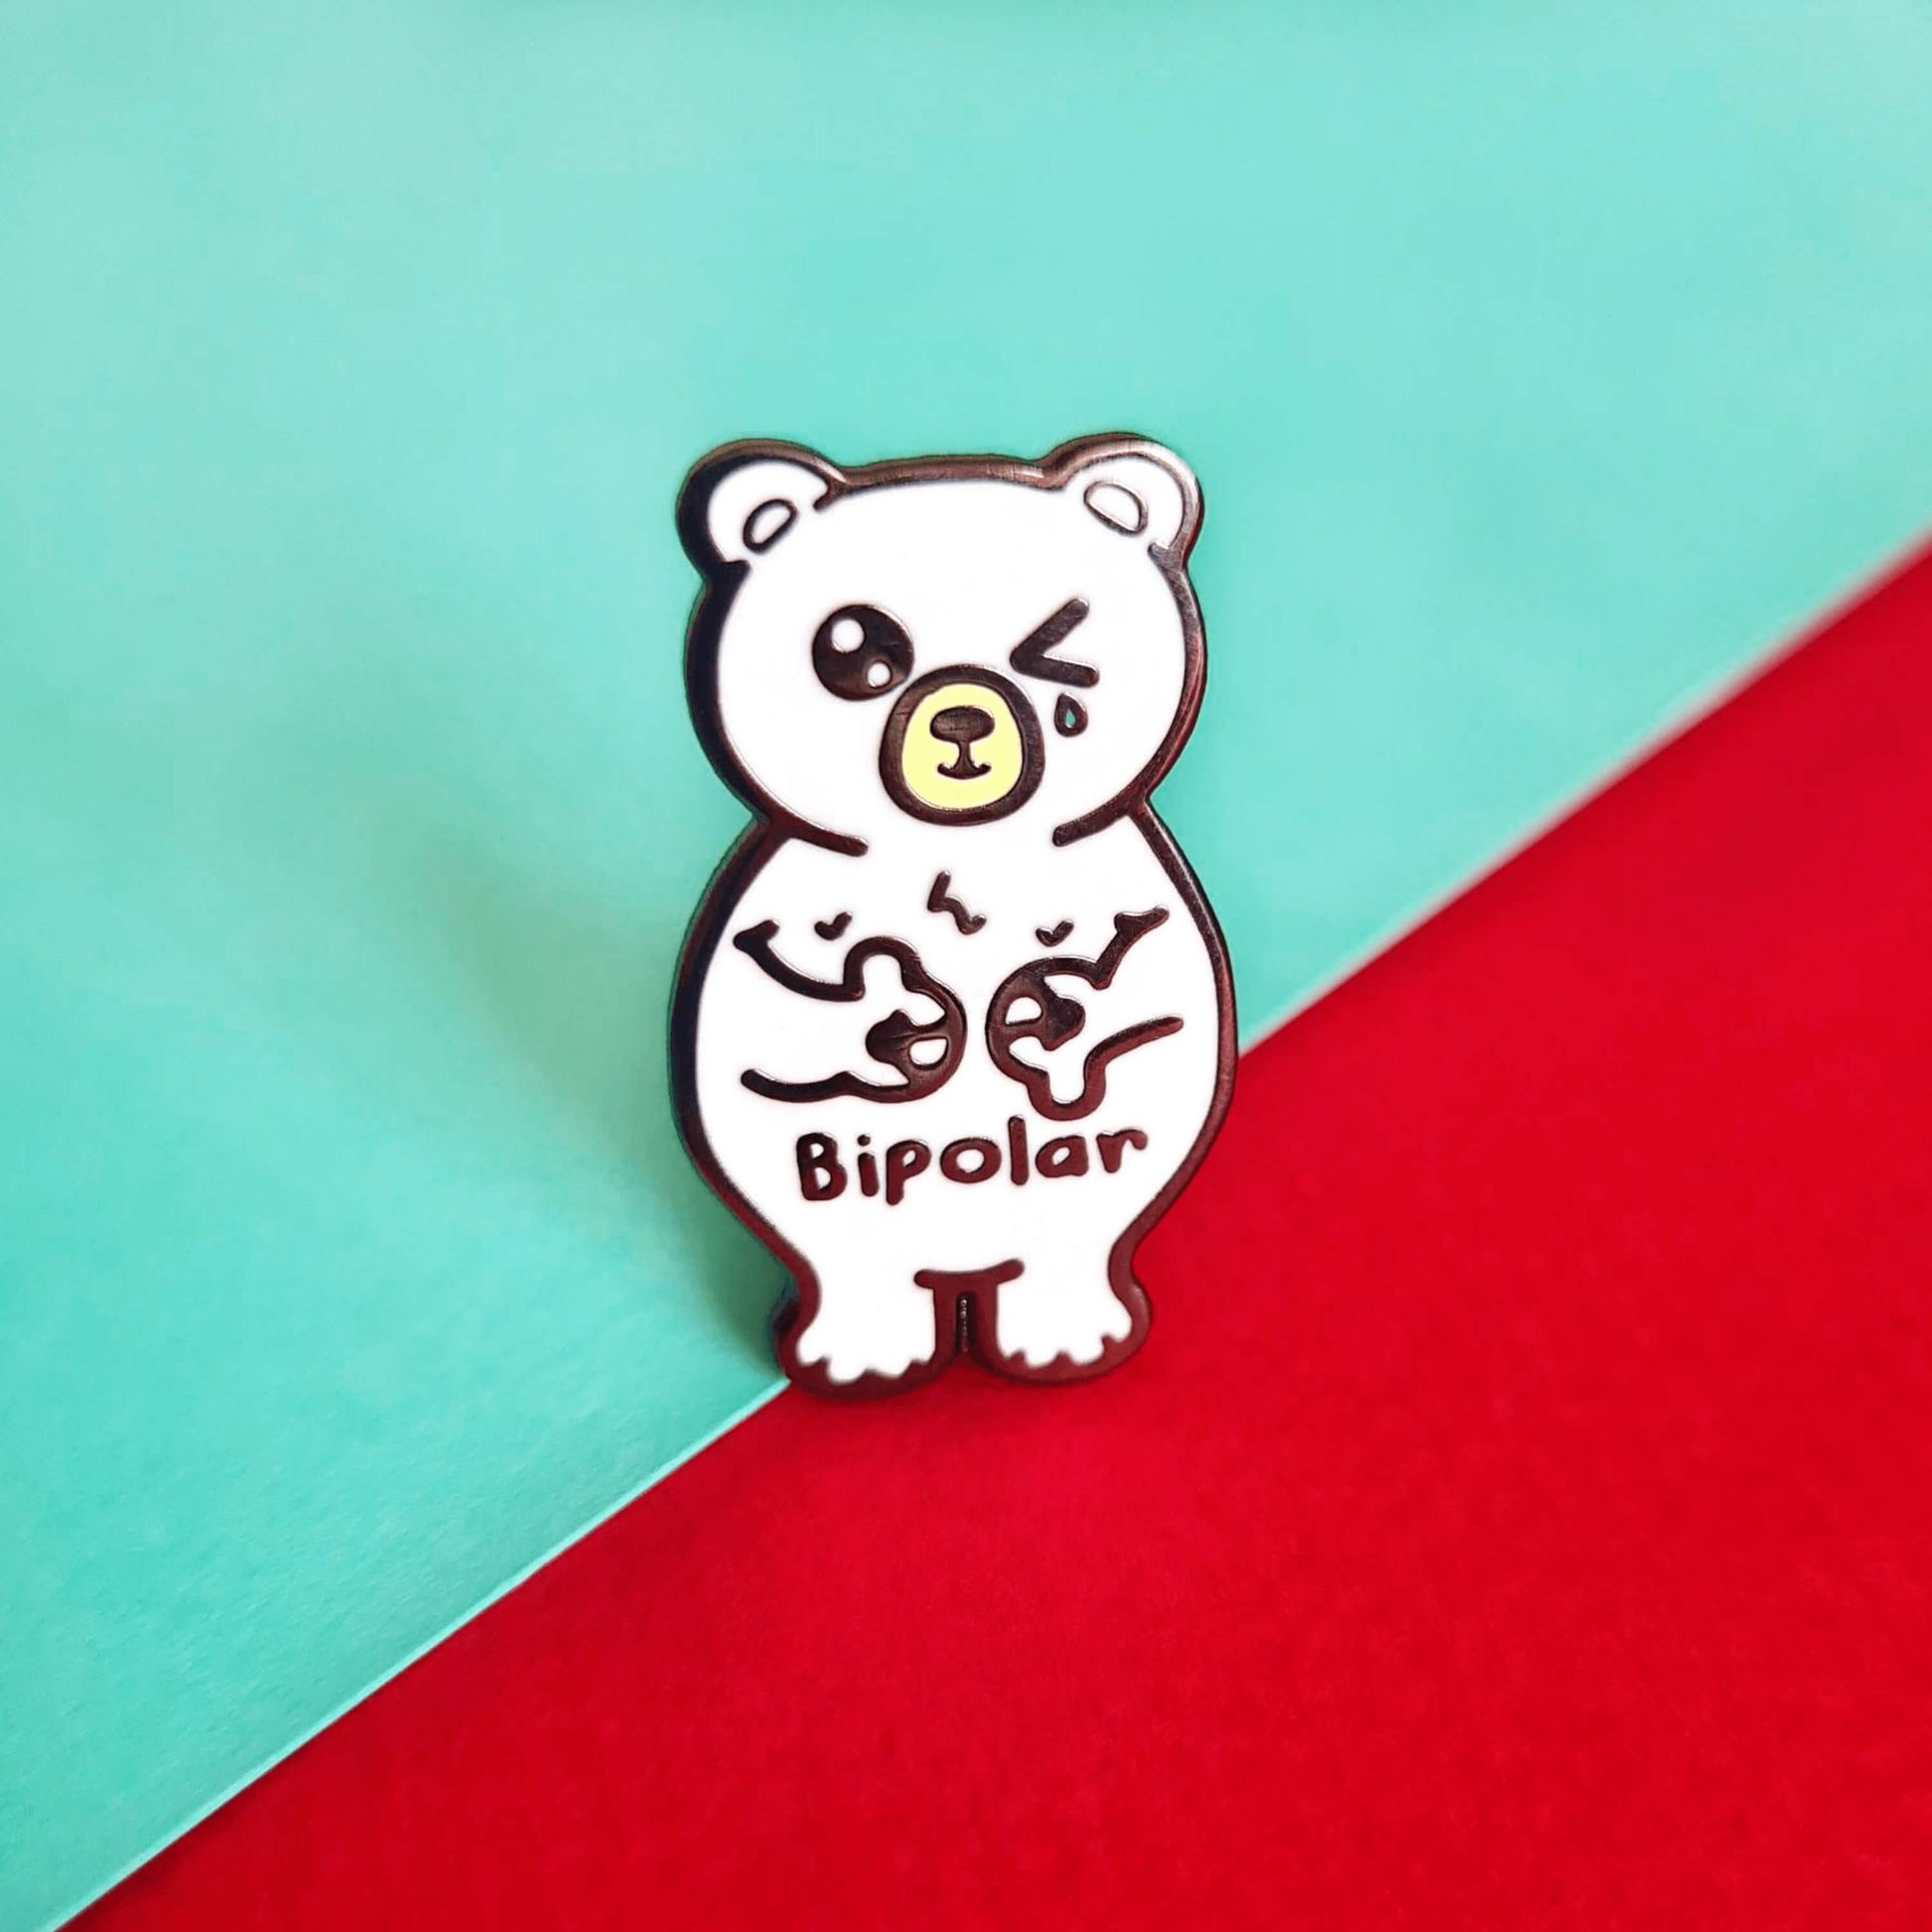 A white polar bear shaped enamel pin with one eye closed shut and a tear coming down its face. The polar bear has a fluffy tummy and has one thumb up and one thumb down. 'Bipolar' is written in black across its tummy. The background of the photo is red and blue.